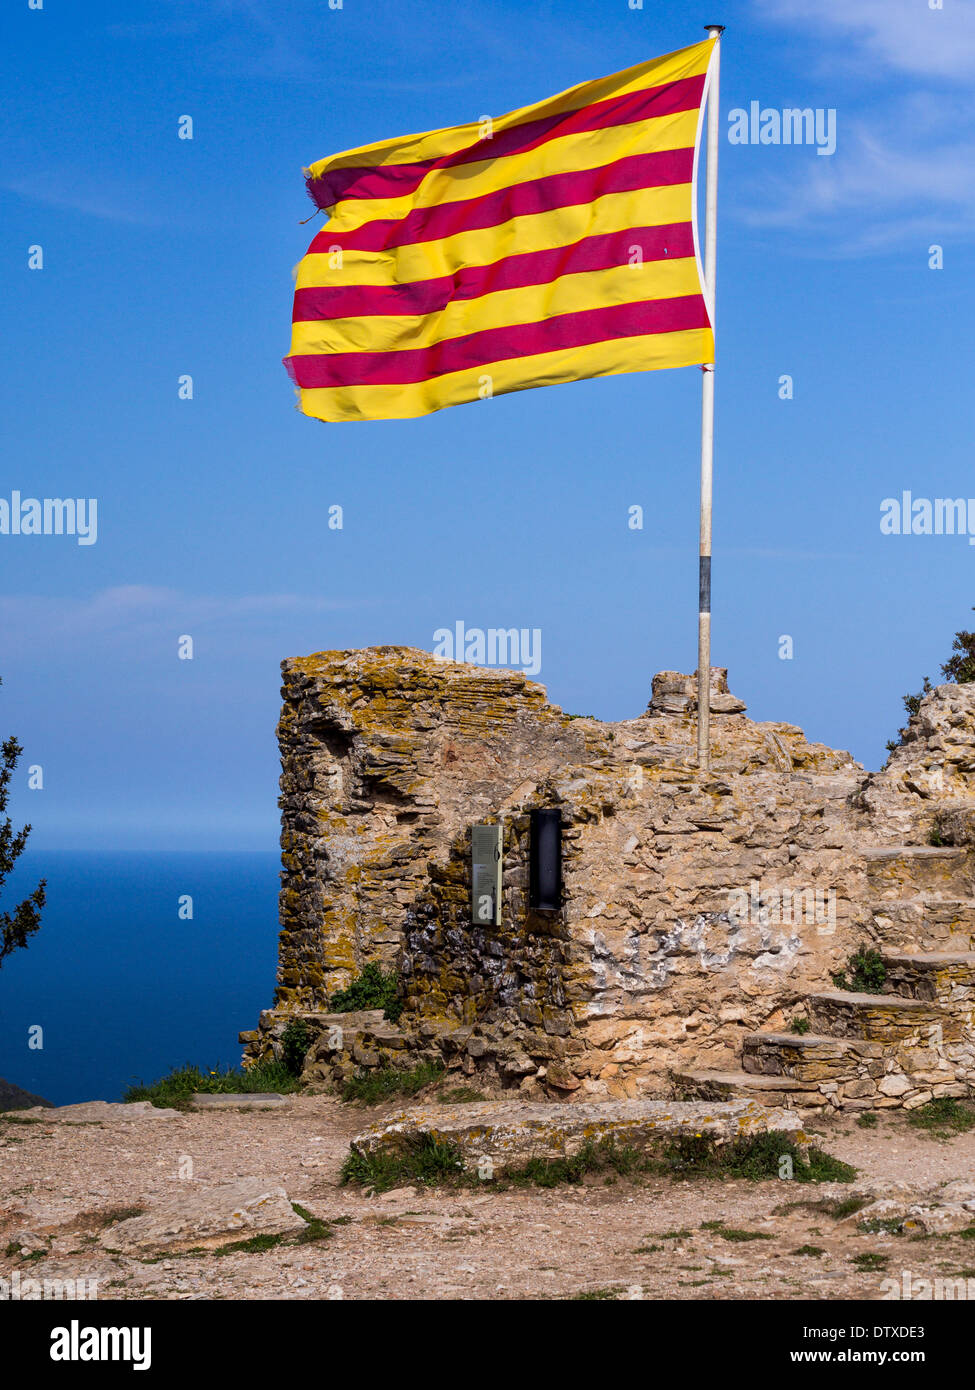 Catalonian Flag on the Fort above Begur. A bright yellow and red flag of Catalonia flies above the hilltop fort  overlooking sea Stock Photo